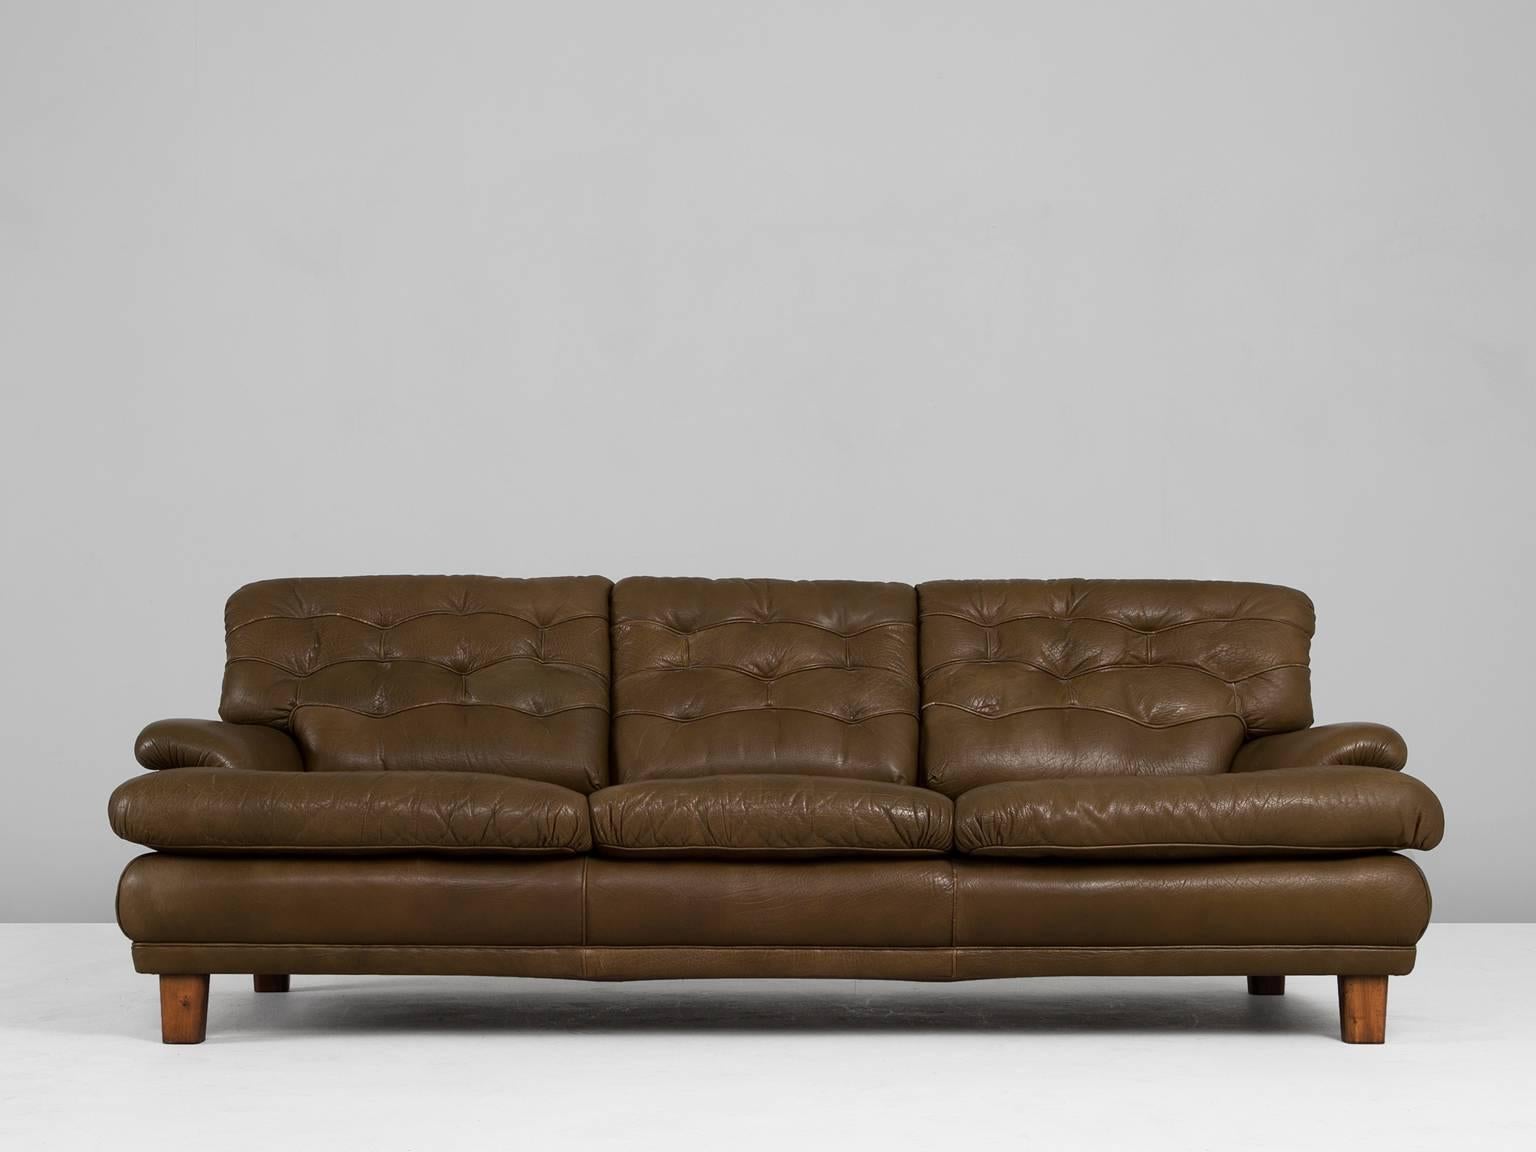 Sofa, in leather and wood, by Arne Norell, Sweden, 1960s.

Excellent three-seat sofa with green leather by Swedish designer Arne Norell. Upholstered in beautiful patinated brown-green leather. Highly comfortable sofa, a trademark of Norell. 

As